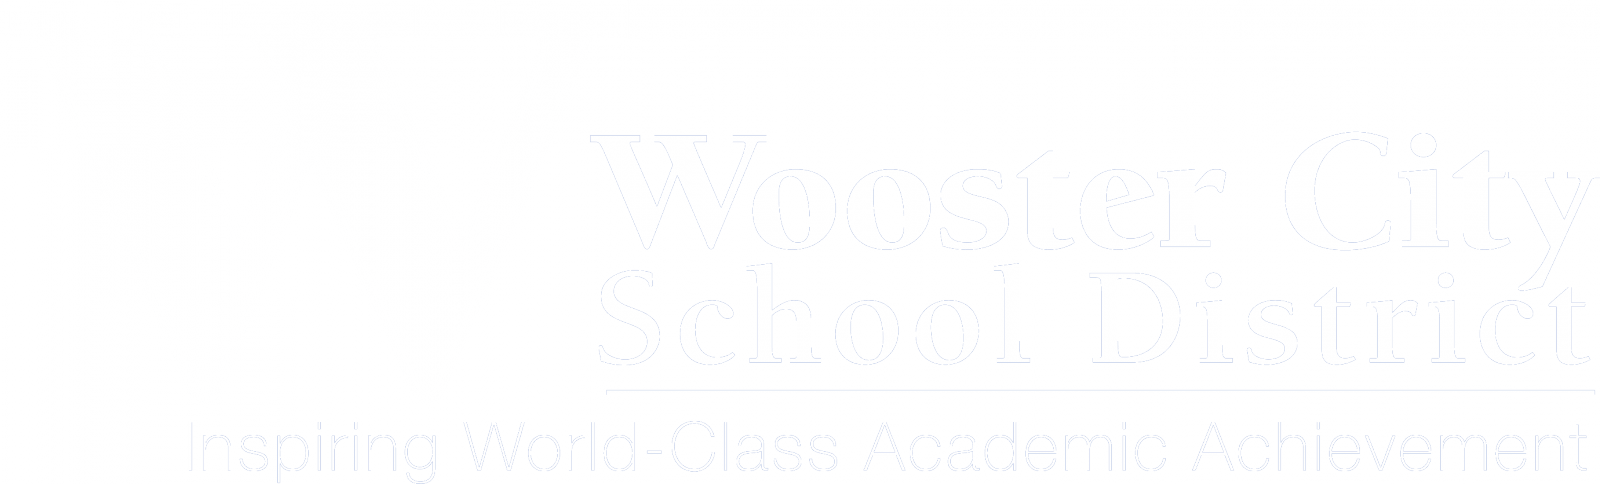 Wooster Logo - Our Brand | Wooster City Schools